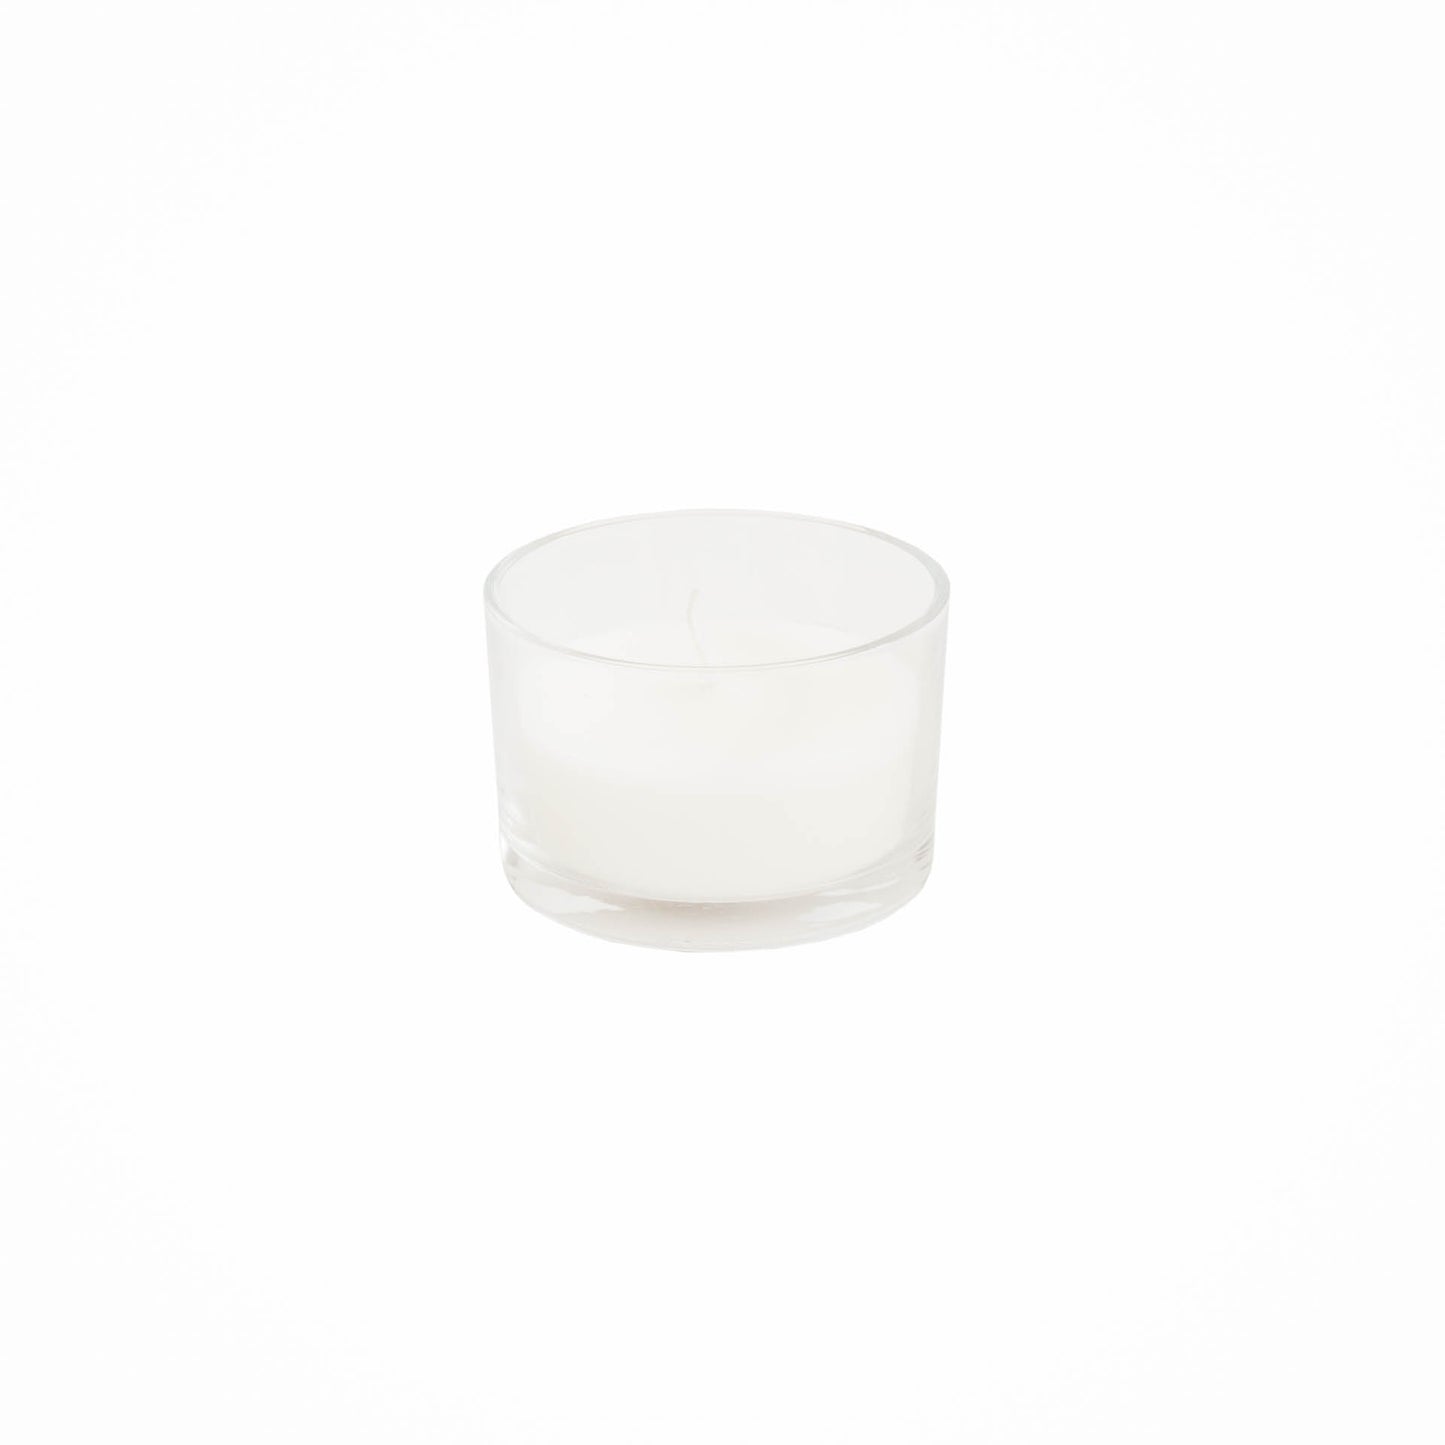 HV Home de Cologne Scented Candle - 50gr - Day Dreaming